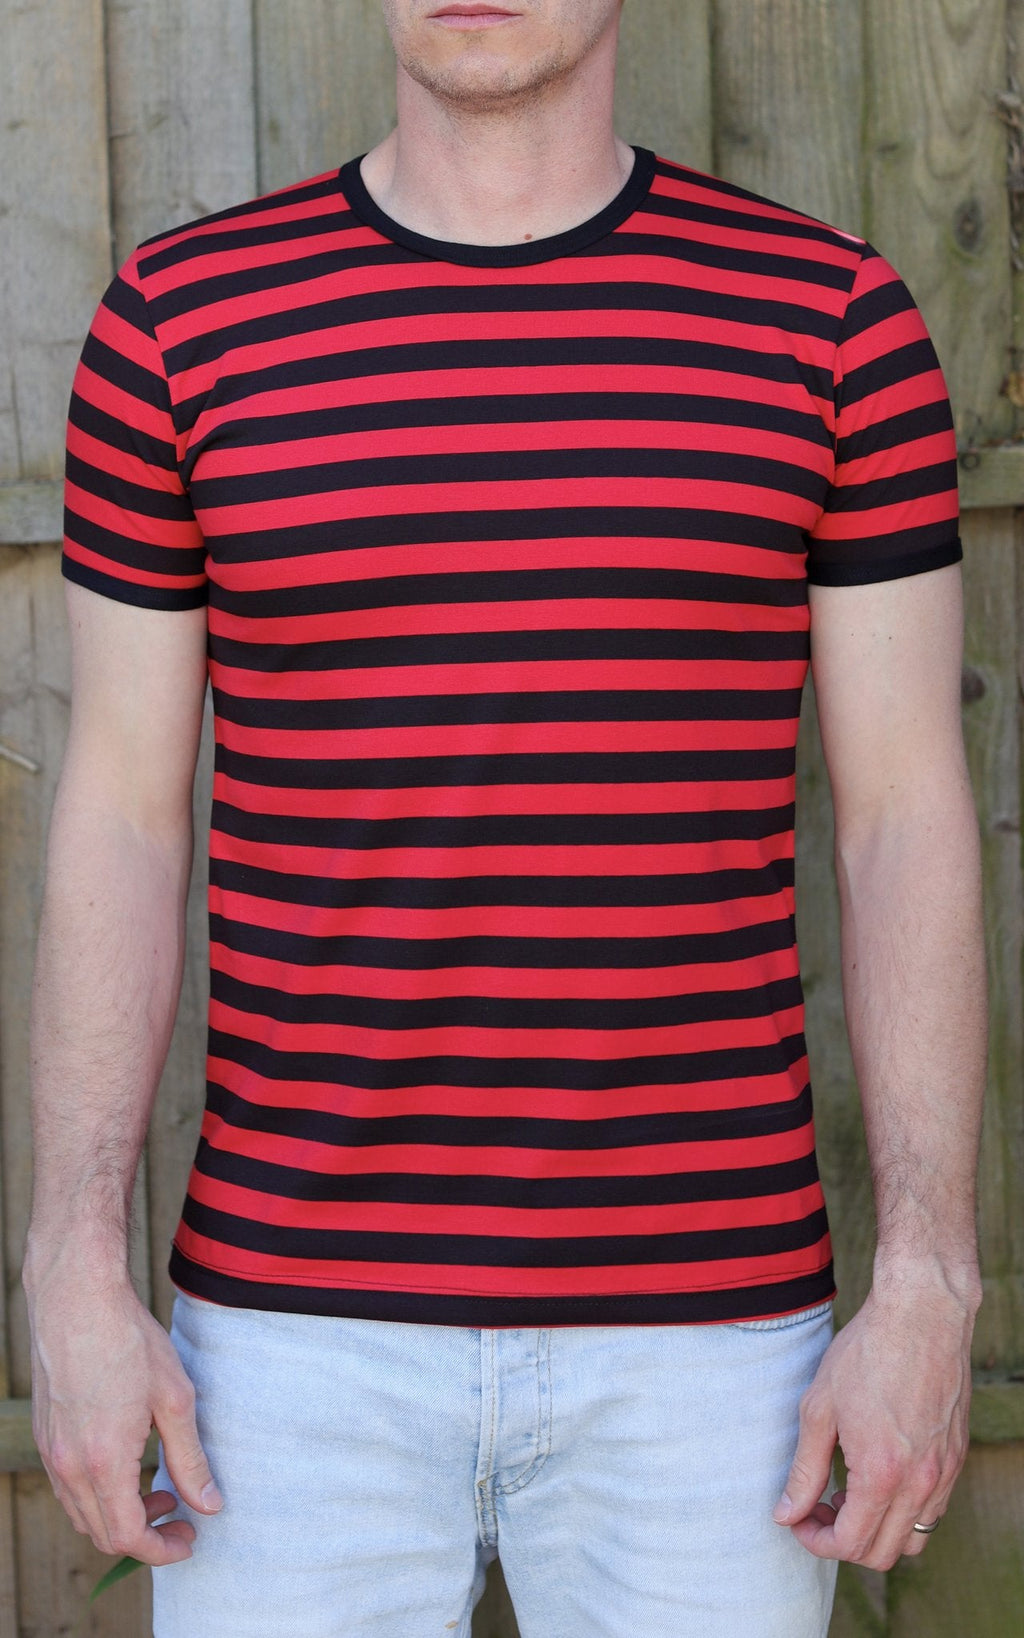 Red and Black Stripe Print T Shirt by Run and Fly Short Sleeve - Minimum Mouse